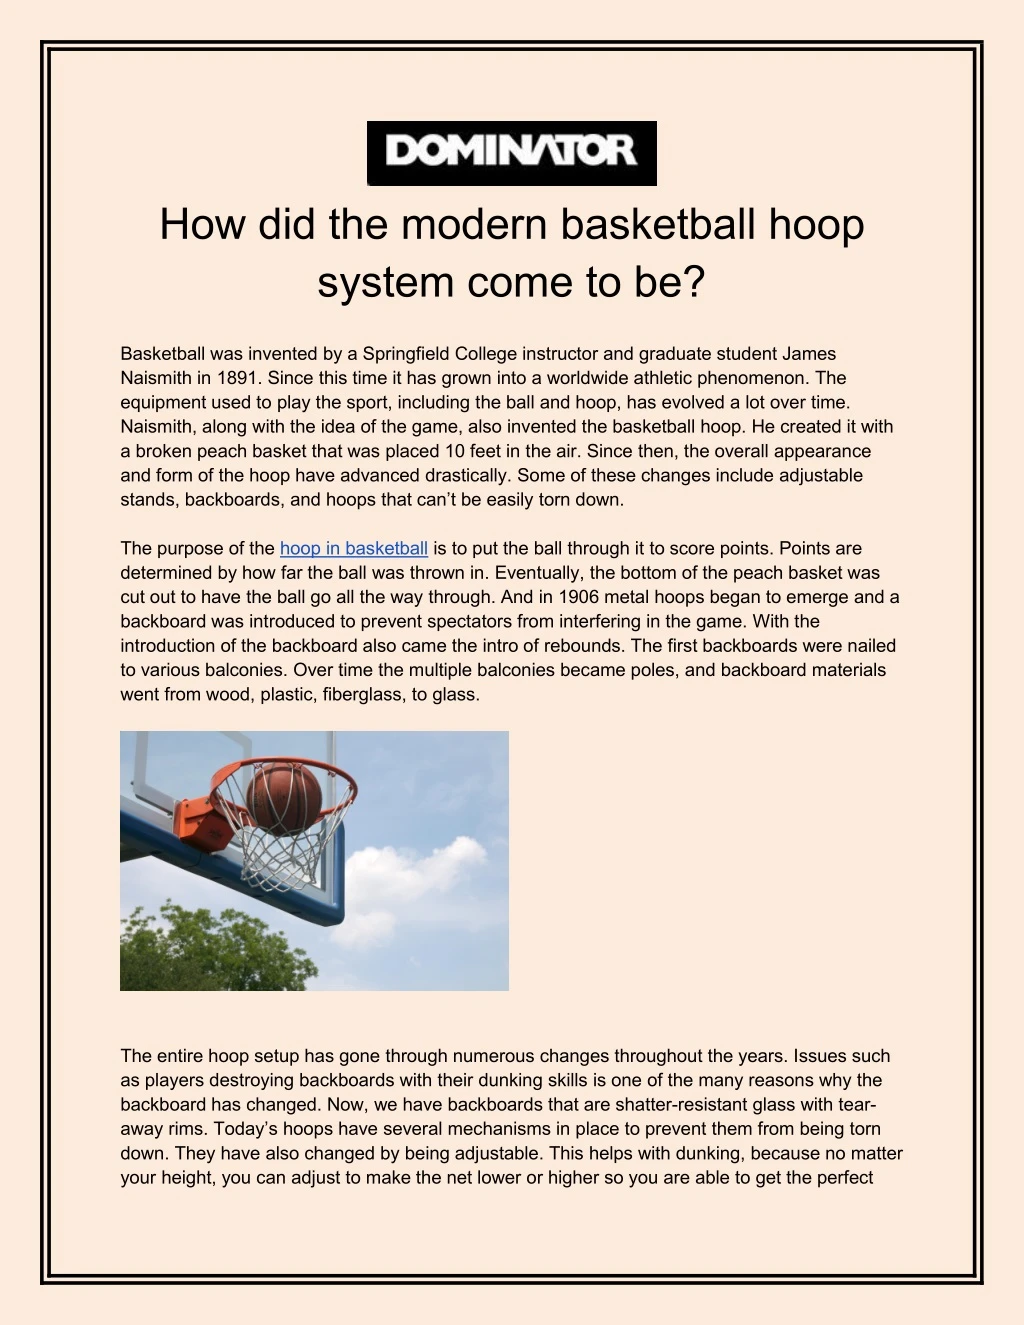 how did the modern basketball hoop system come